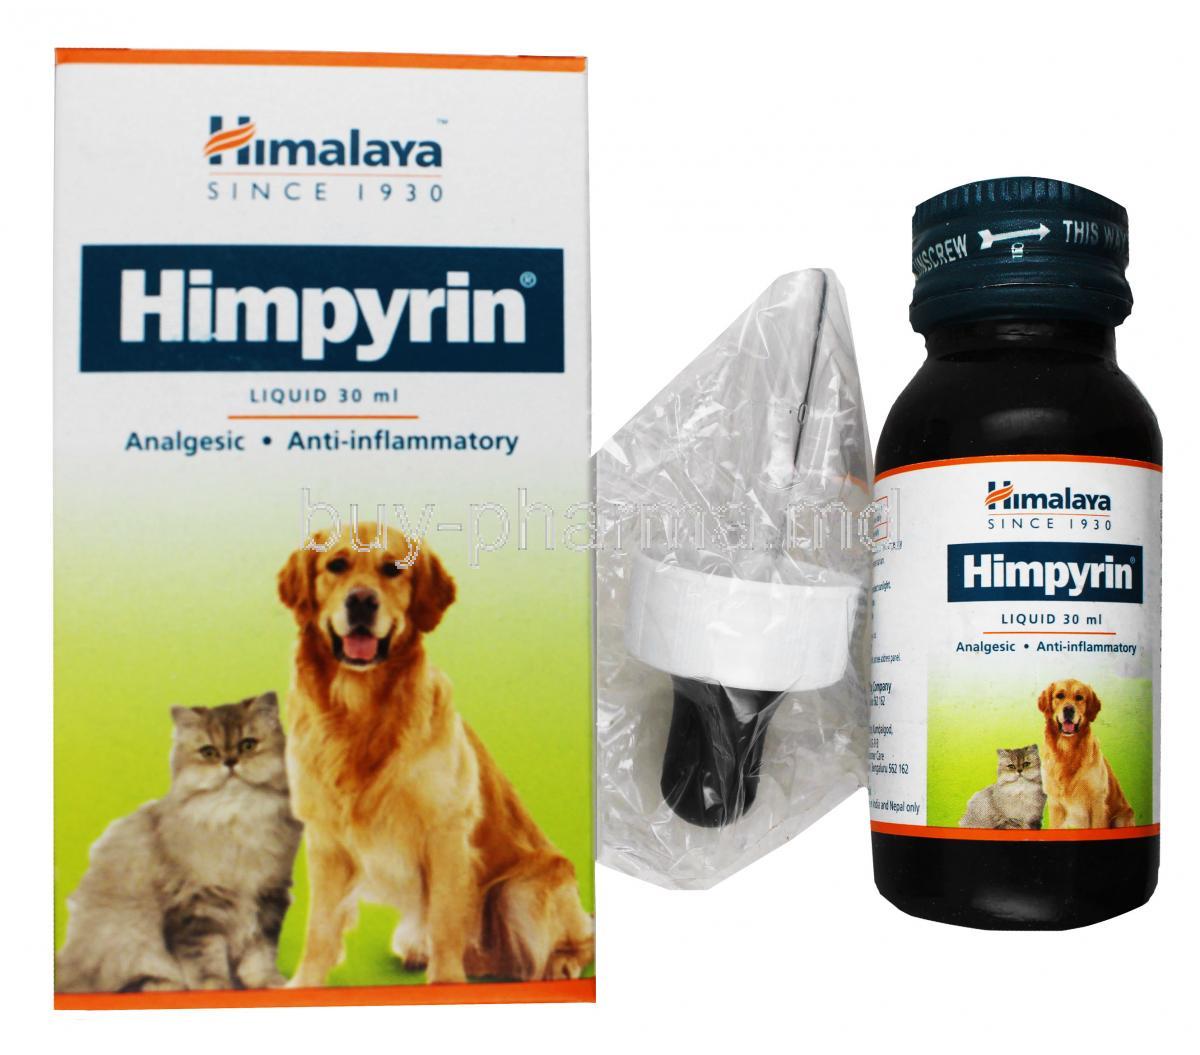 Himpyrin Liquid for Dogs and Cats box and bottle